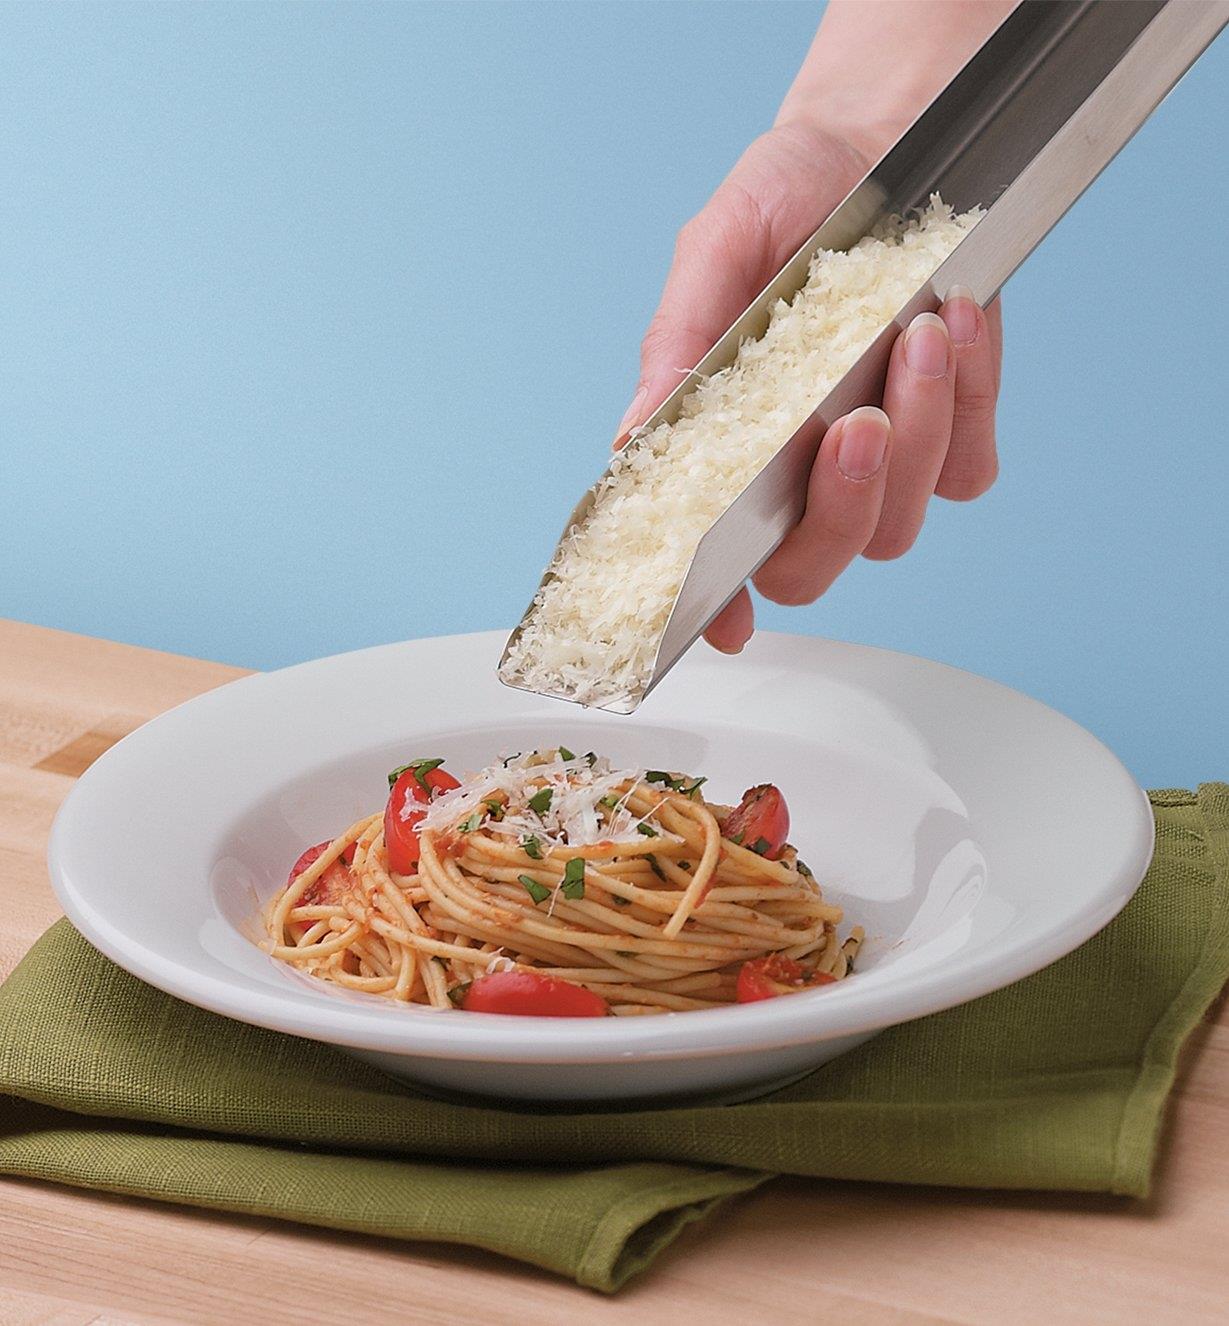 Using the Zester Holder to transfer freshly grated Parmesan cheese to a bowl of pasta